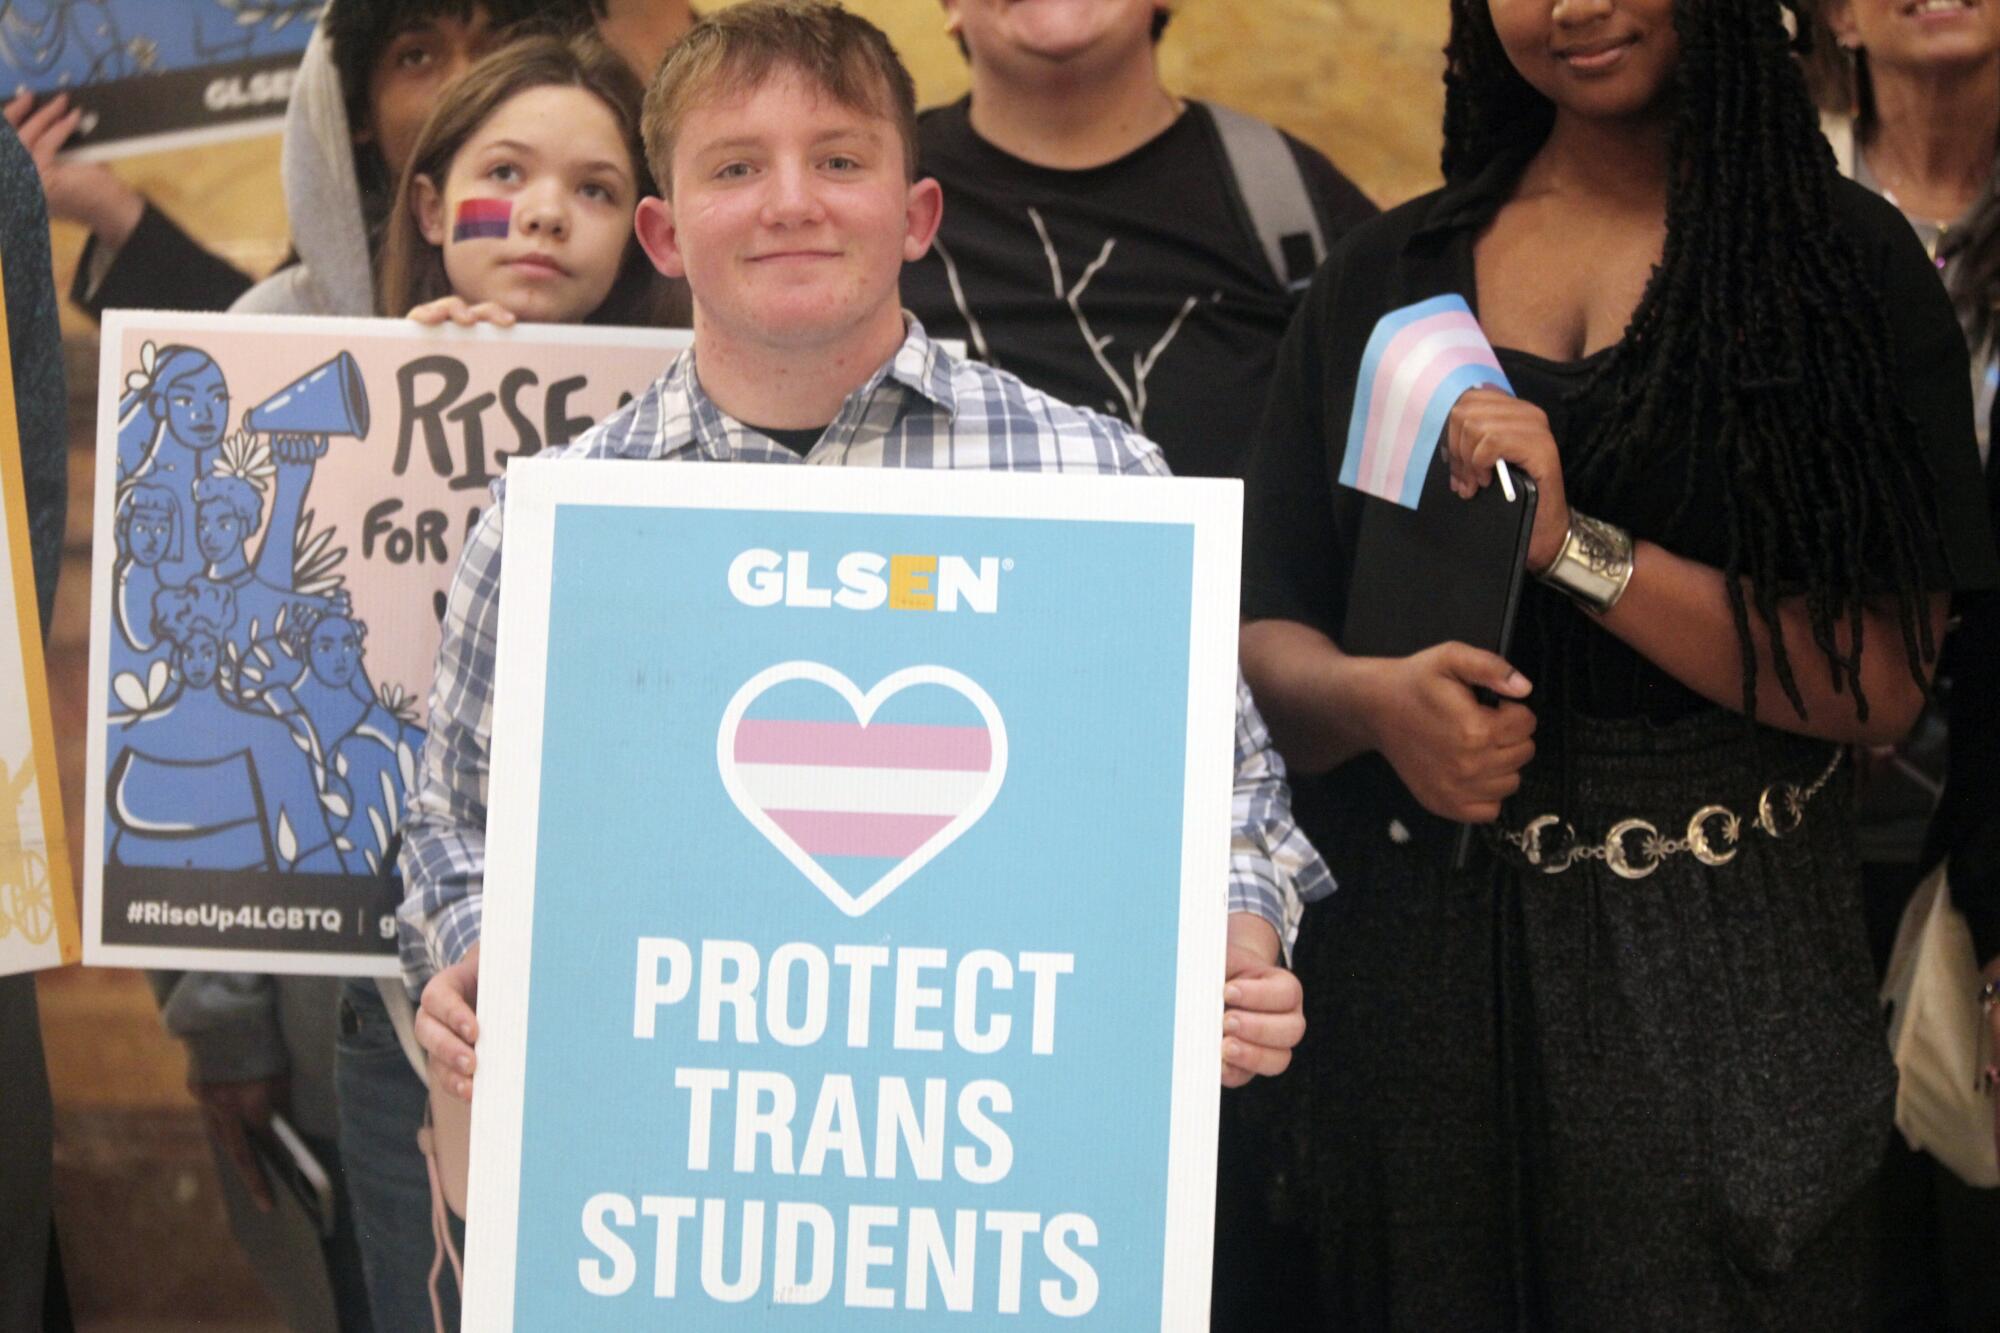 A person holds a sign that says "Protect trans students."